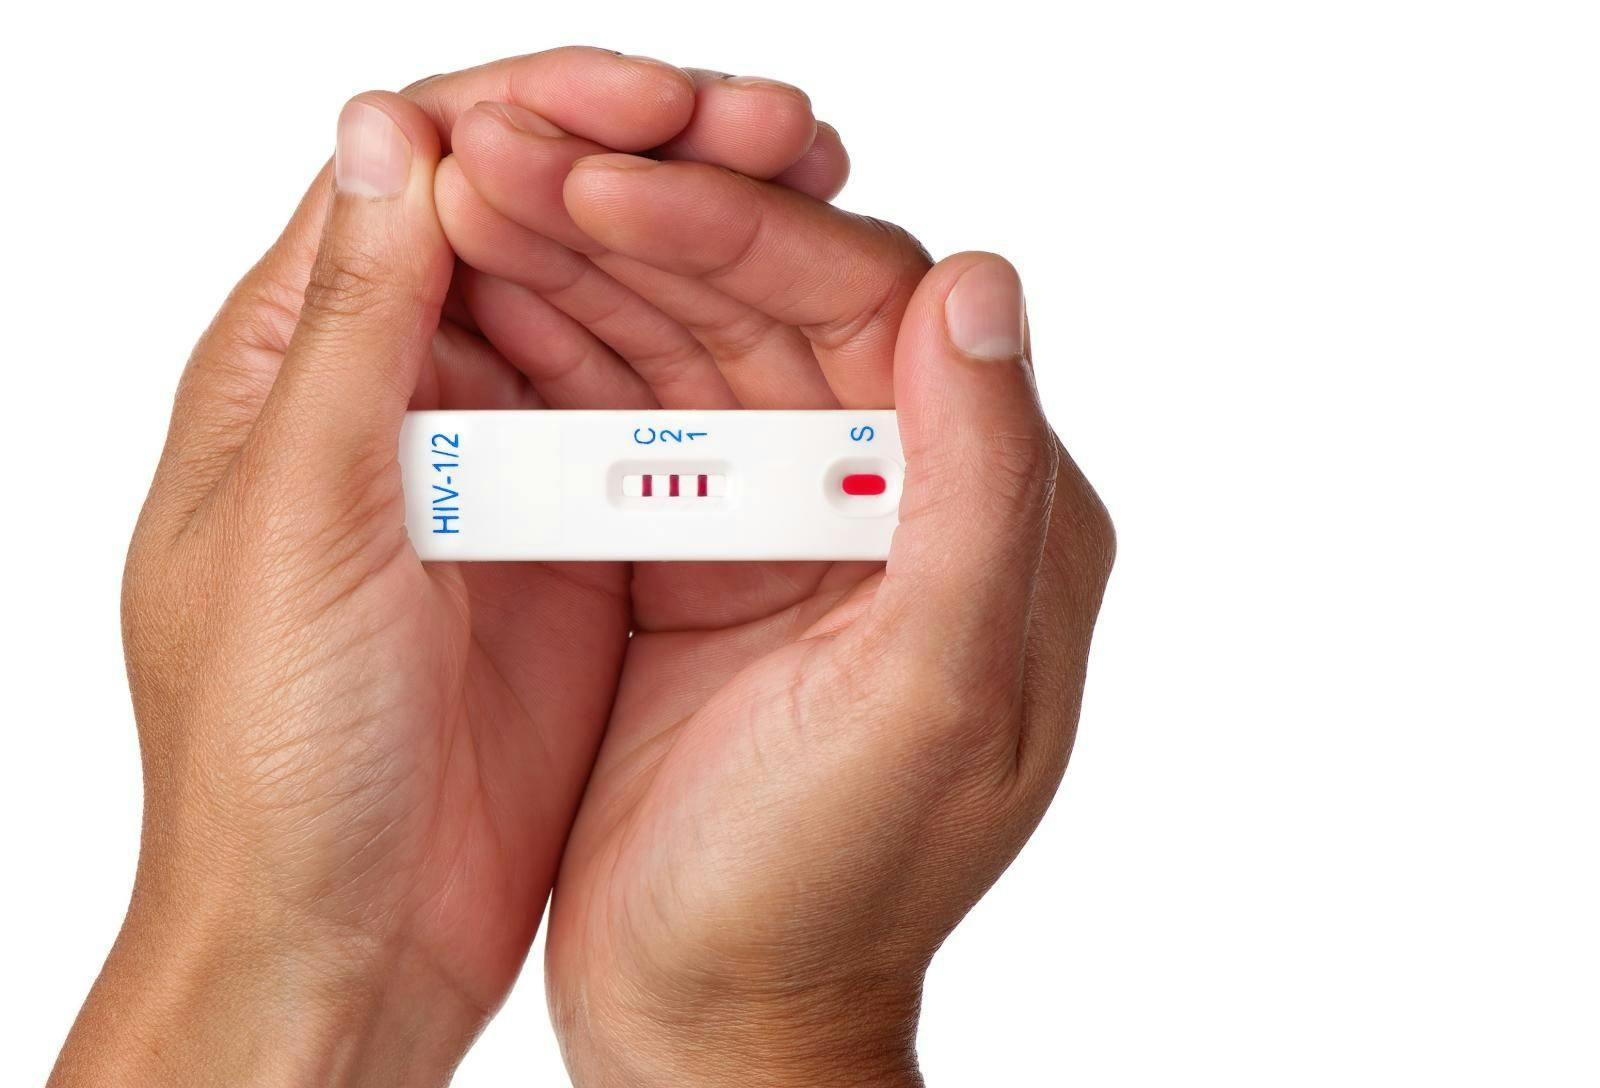 Offer Advice on Using At-Home HIV Tests